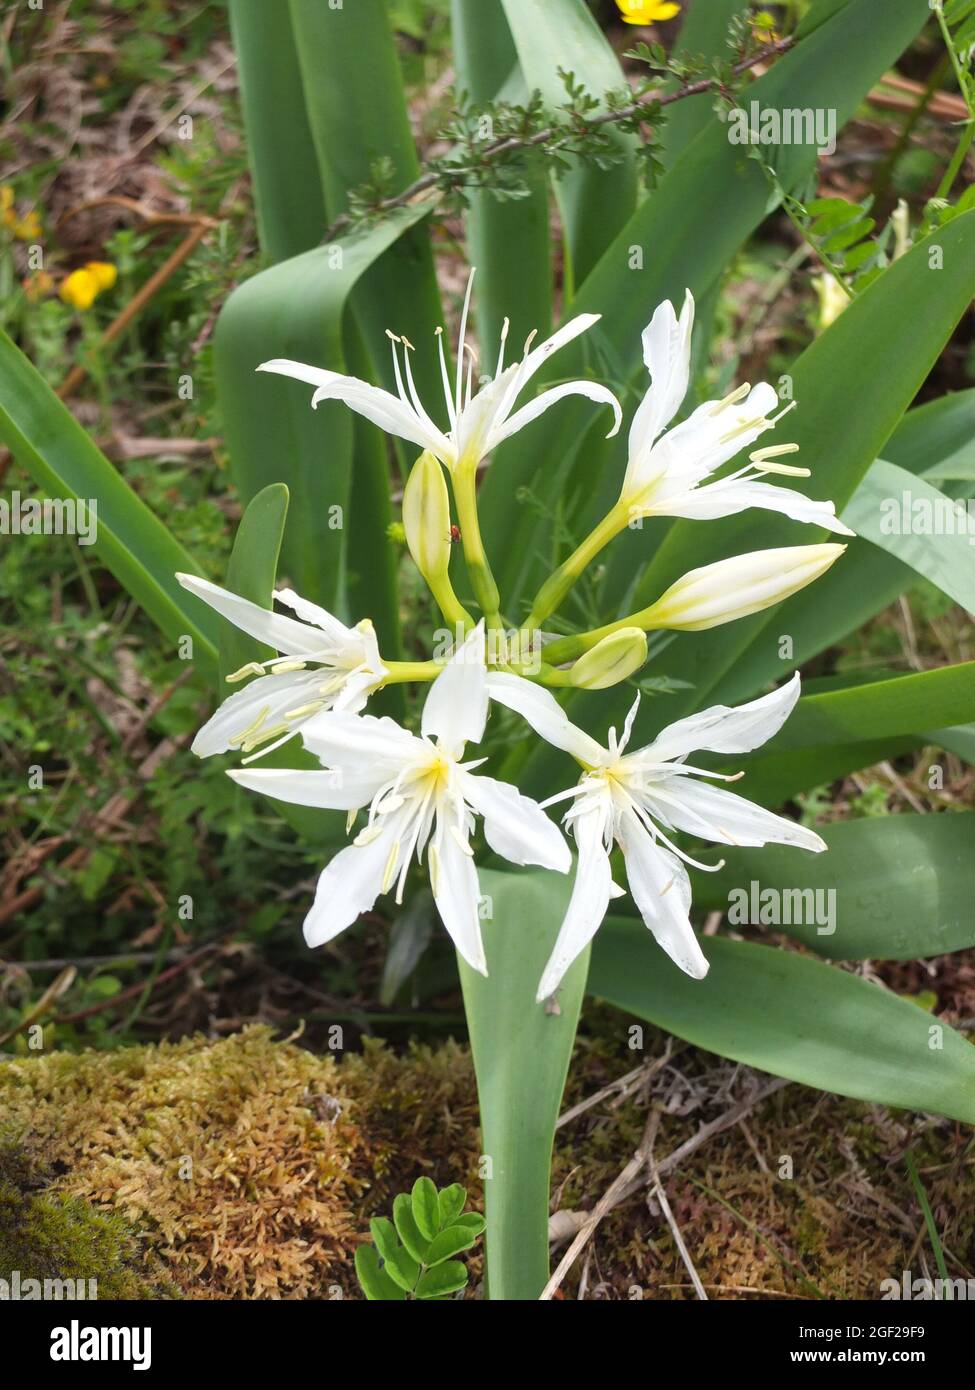 Endemic plant Illyrian Sea Lily (Pancratium illyricum) in the mountains of Corsica, France Stock Photo